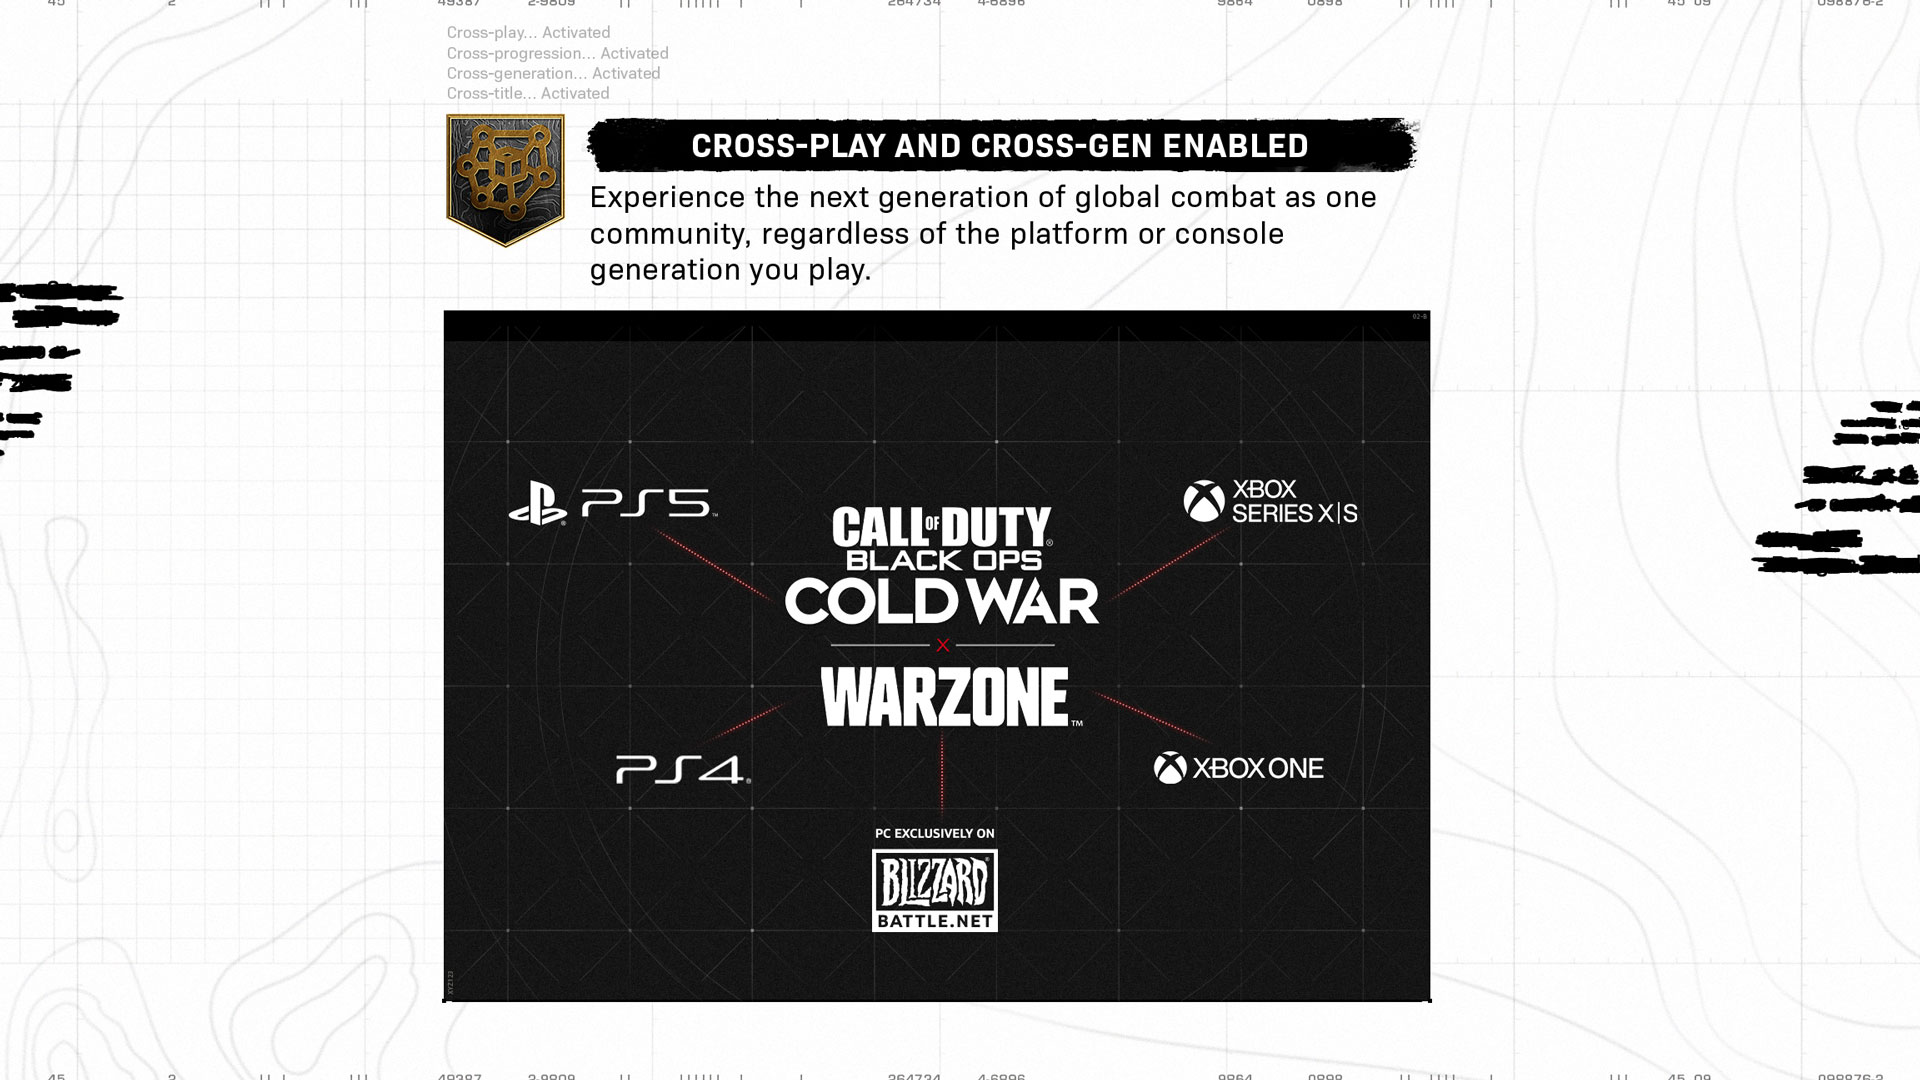 call-of-duty-black-ops-cold-war-warzone-cross-play_0000967487.jpg